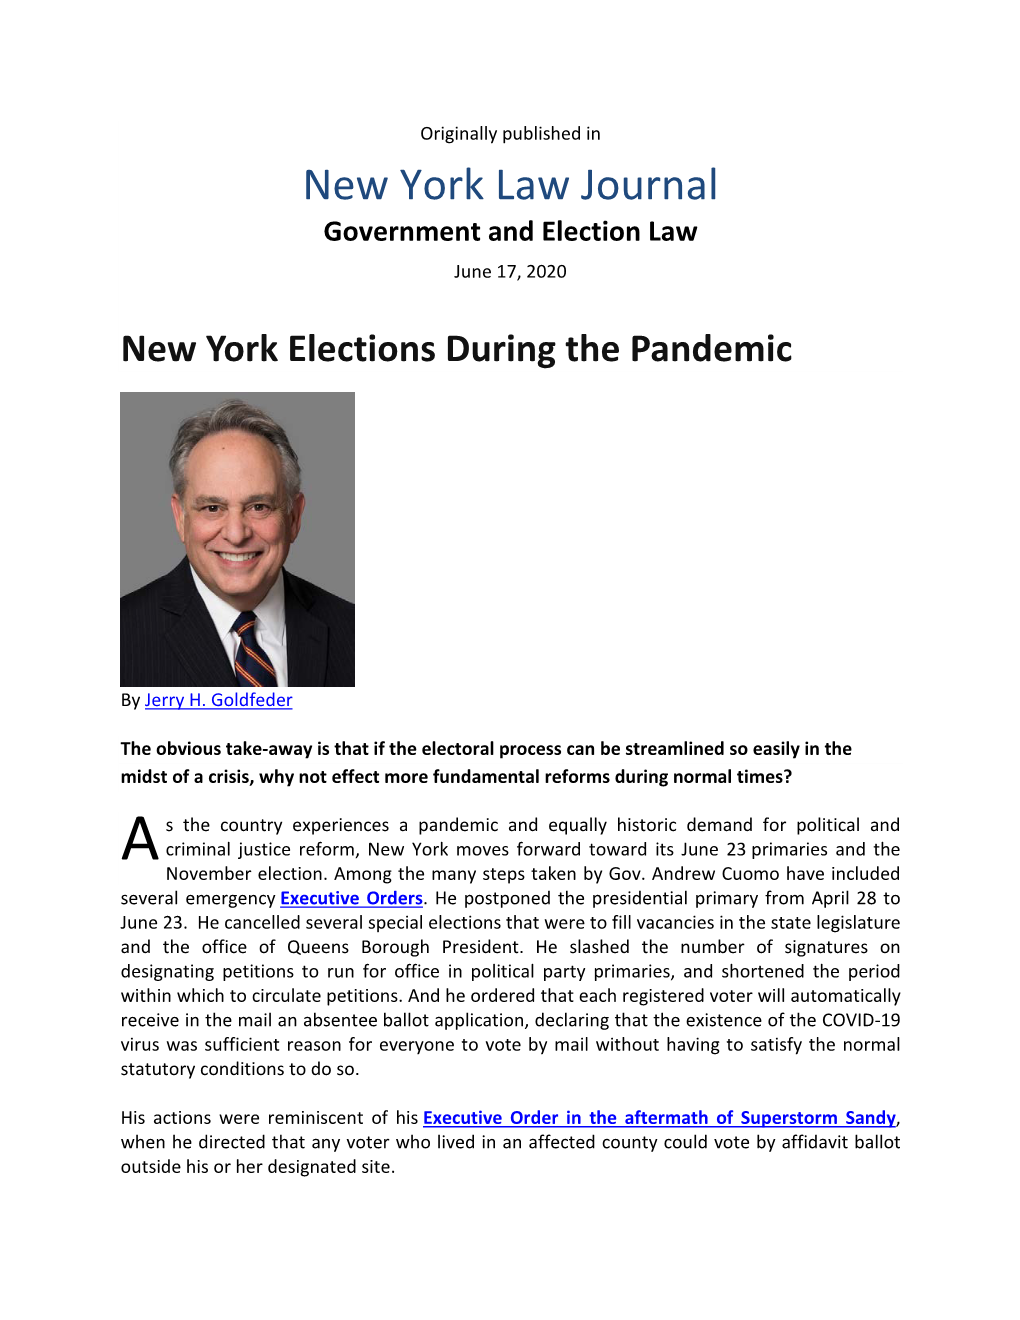 New York Law Journal Government and Election Law June 17, 2020